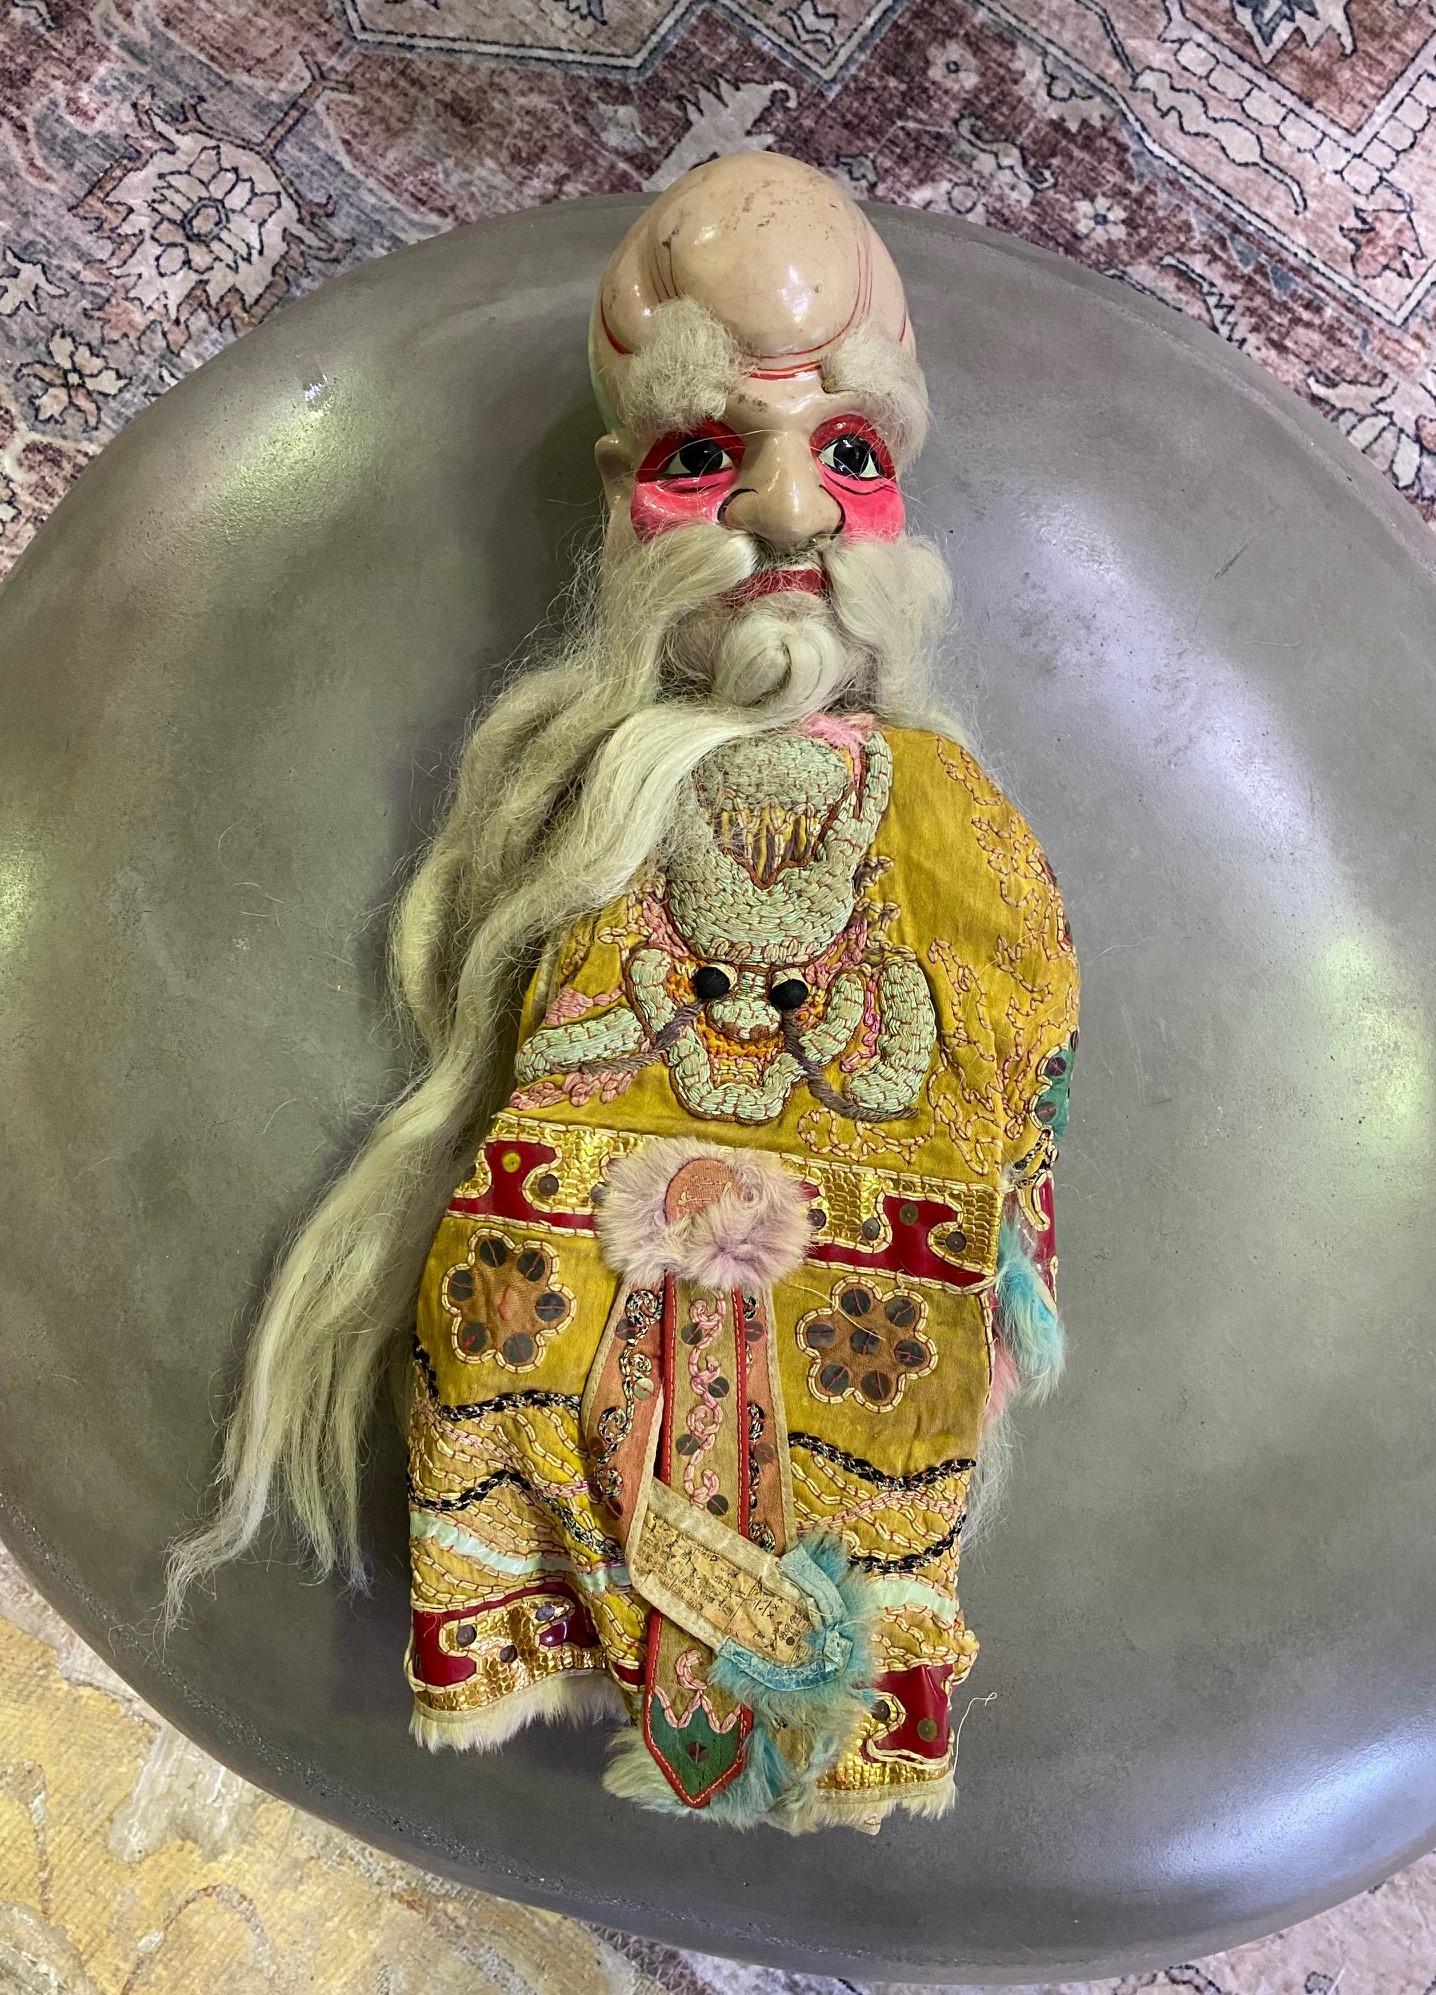 A wonderful work complete with a unique wood-carved and hand-painted face and original textile garment/ robe with a dragon symbol. 

From a group of 7 Chinese opera puppets, we acquired from a collector. Each puppet shows clear signs of previous